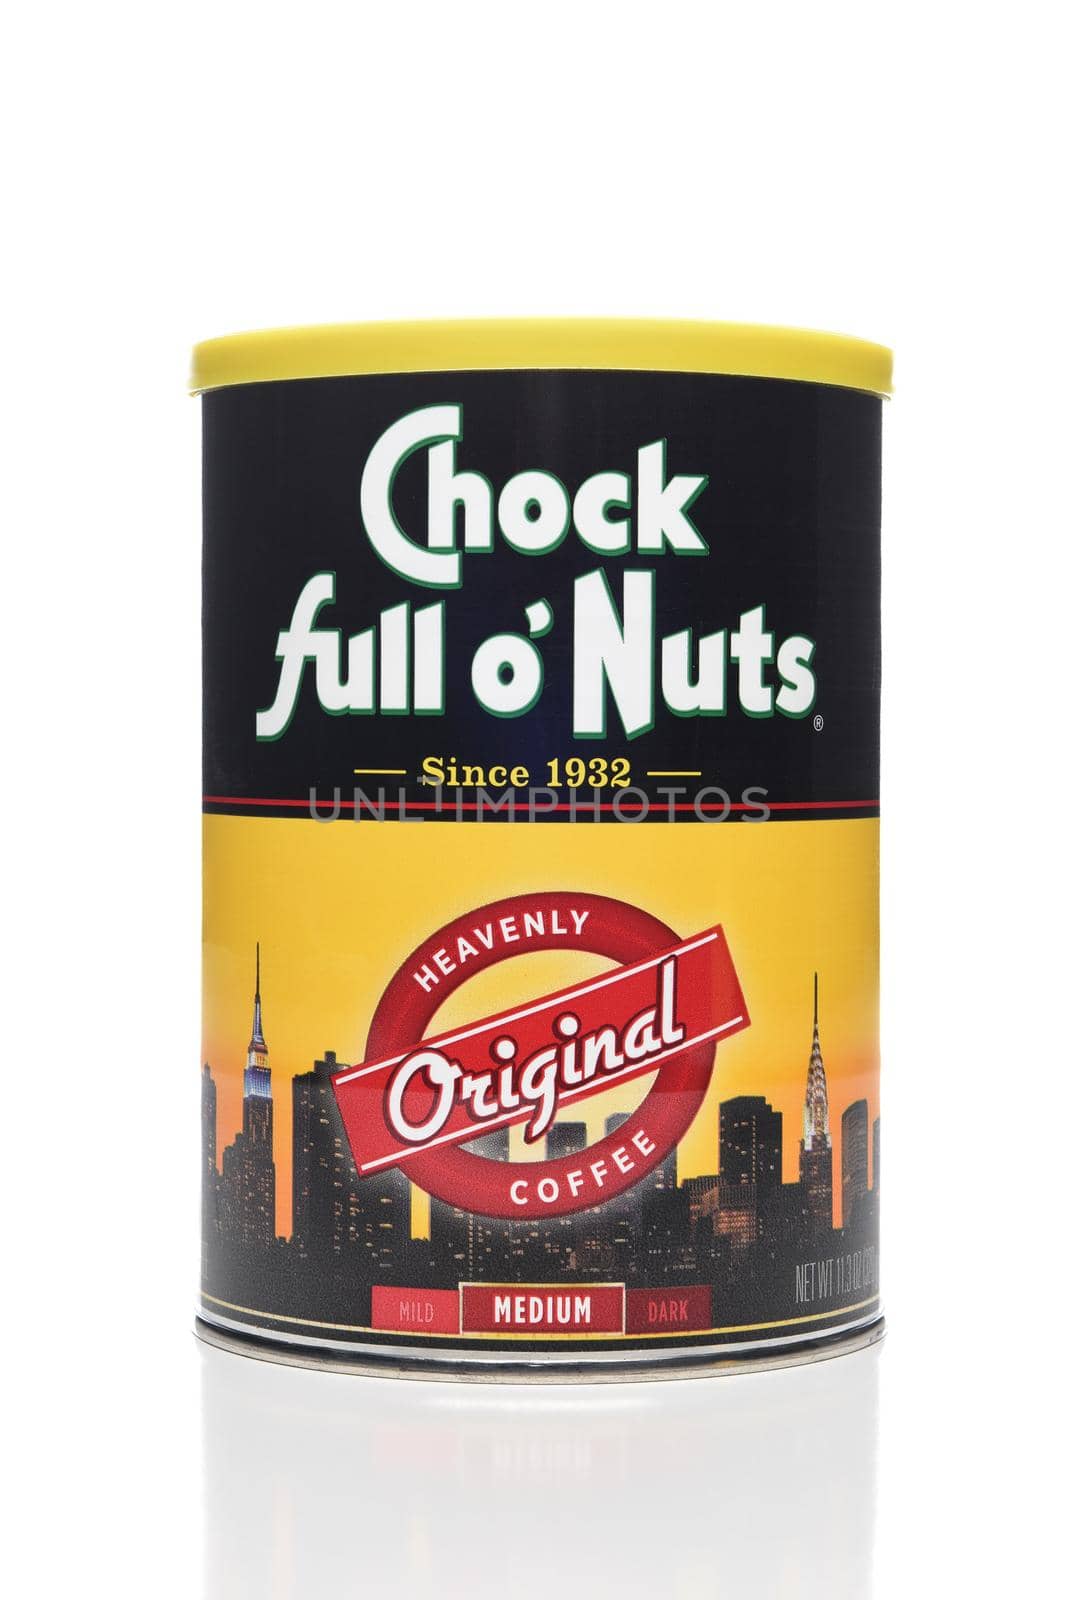  A can of Chock Full o Nuts Coffee by sCukrov